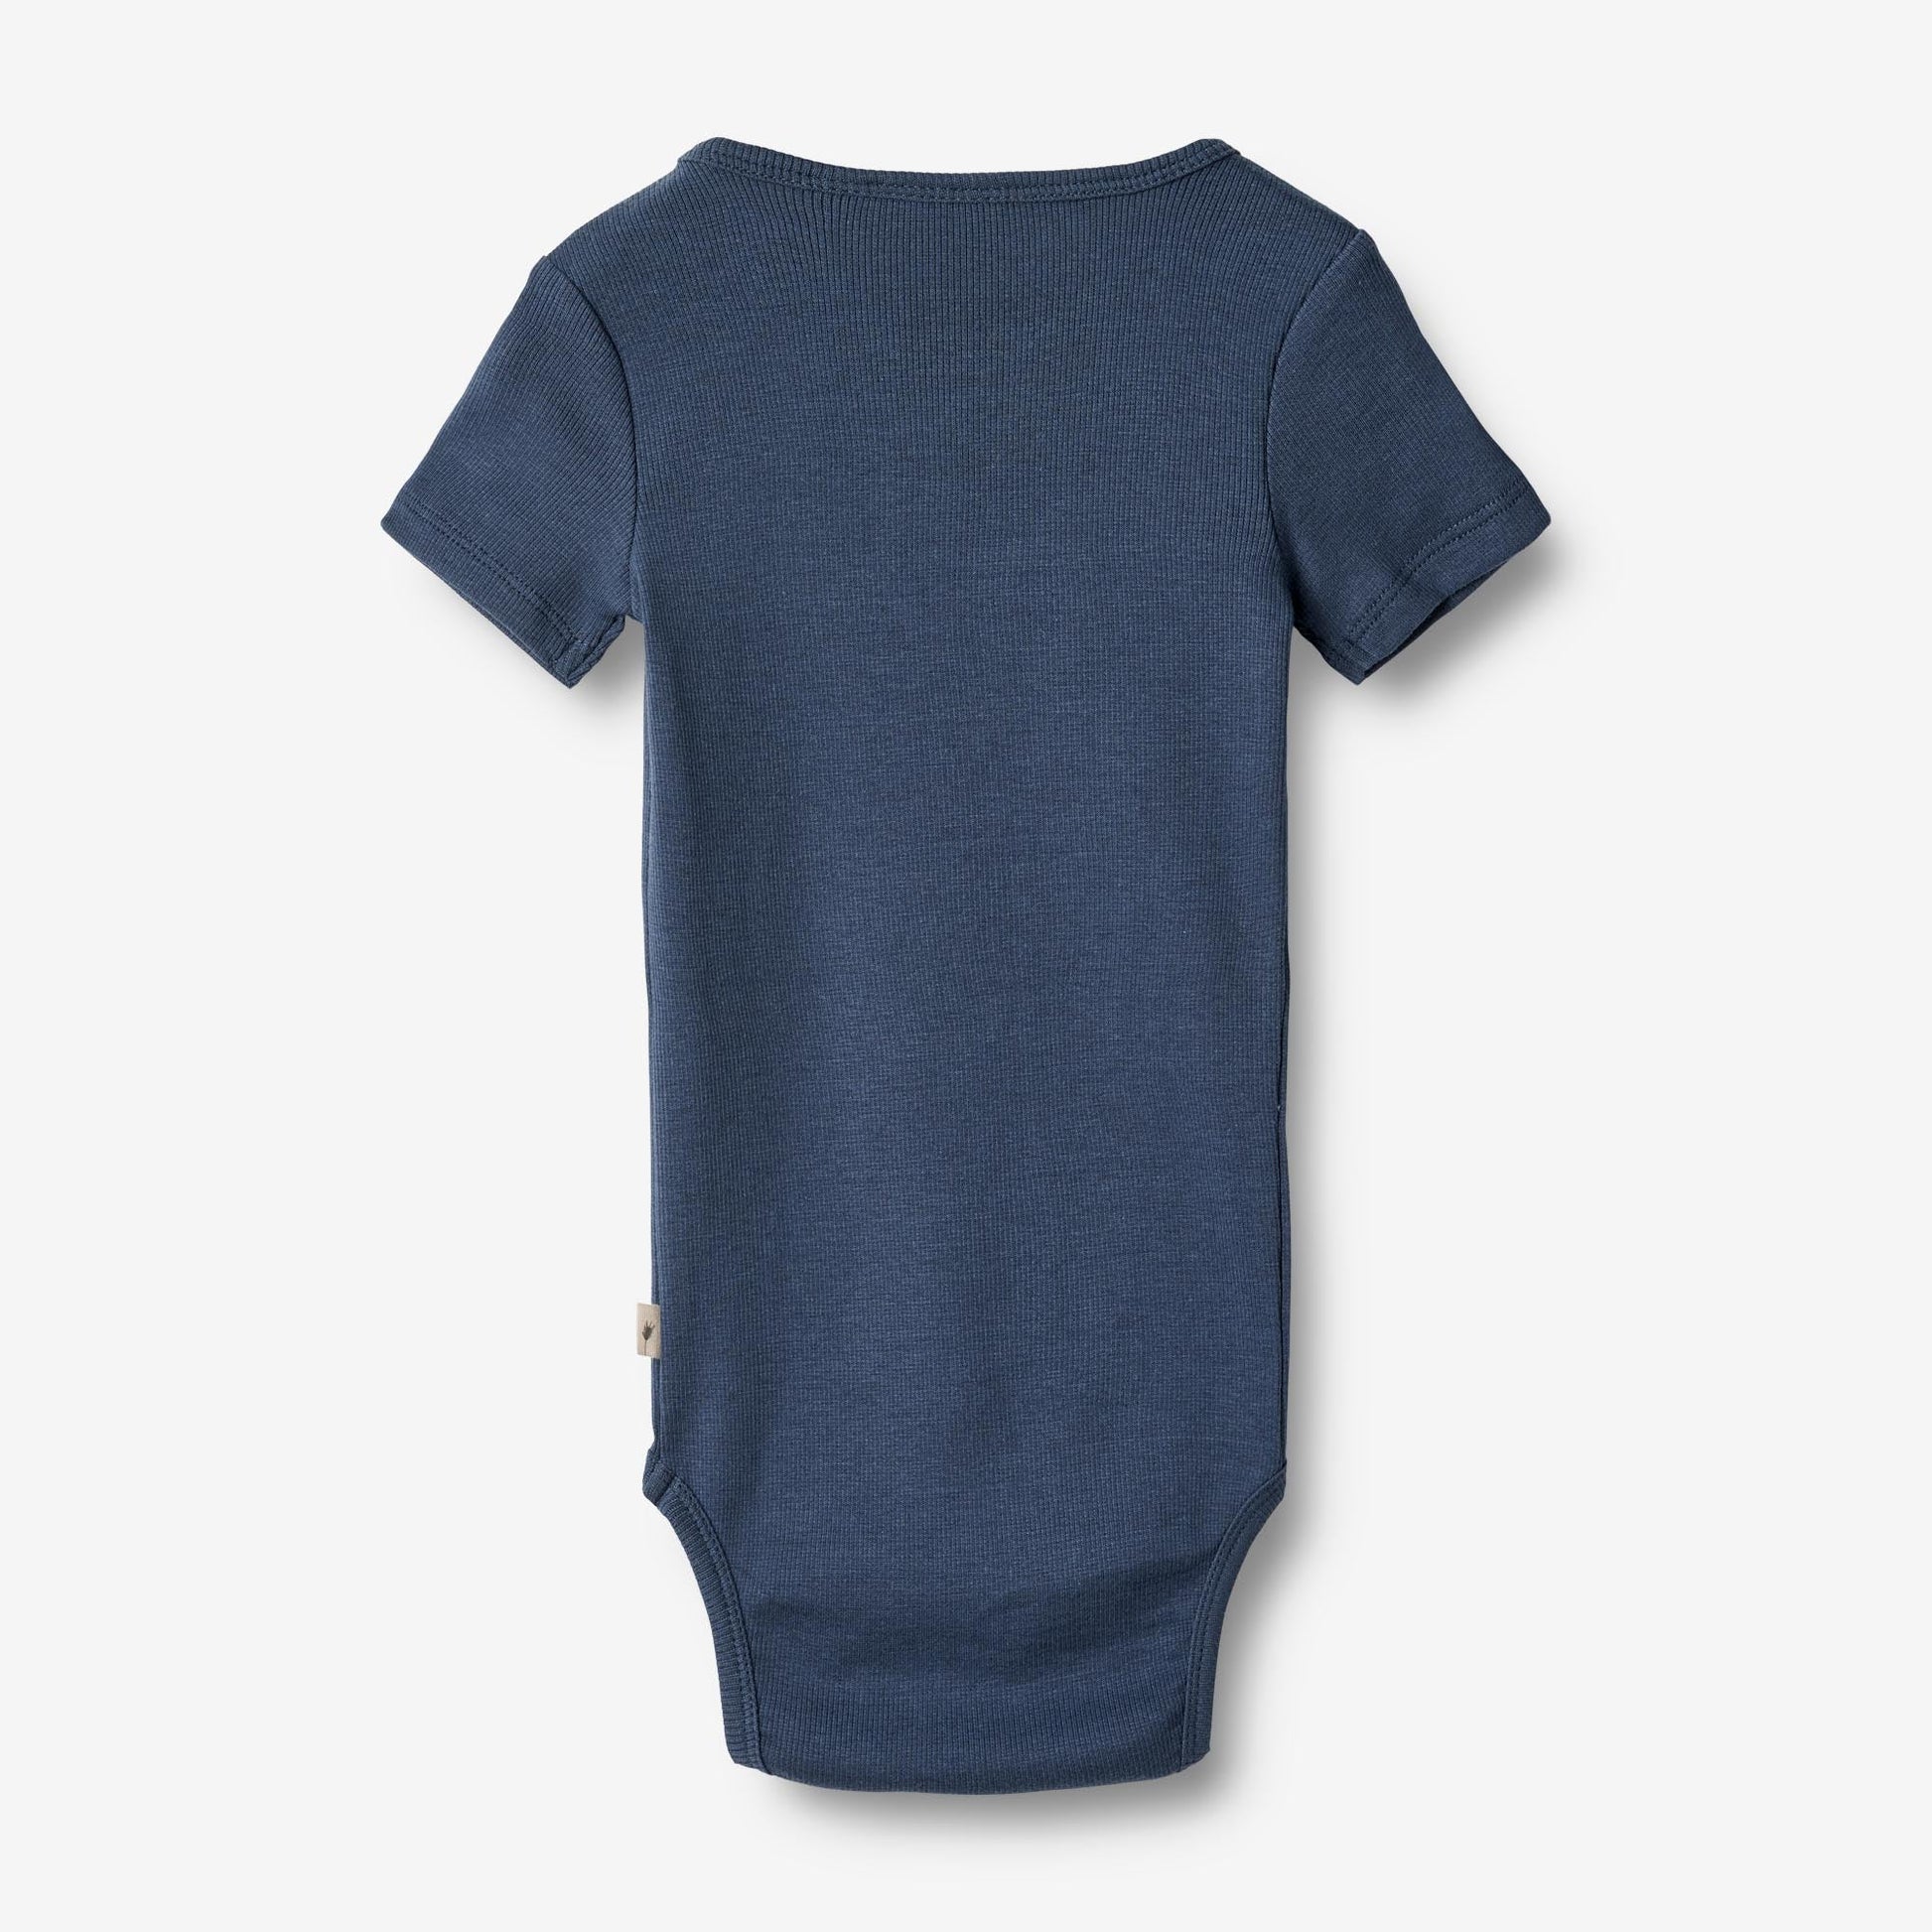 Wheat 'Timo' S/S Rib Baby Body - Blue Waves